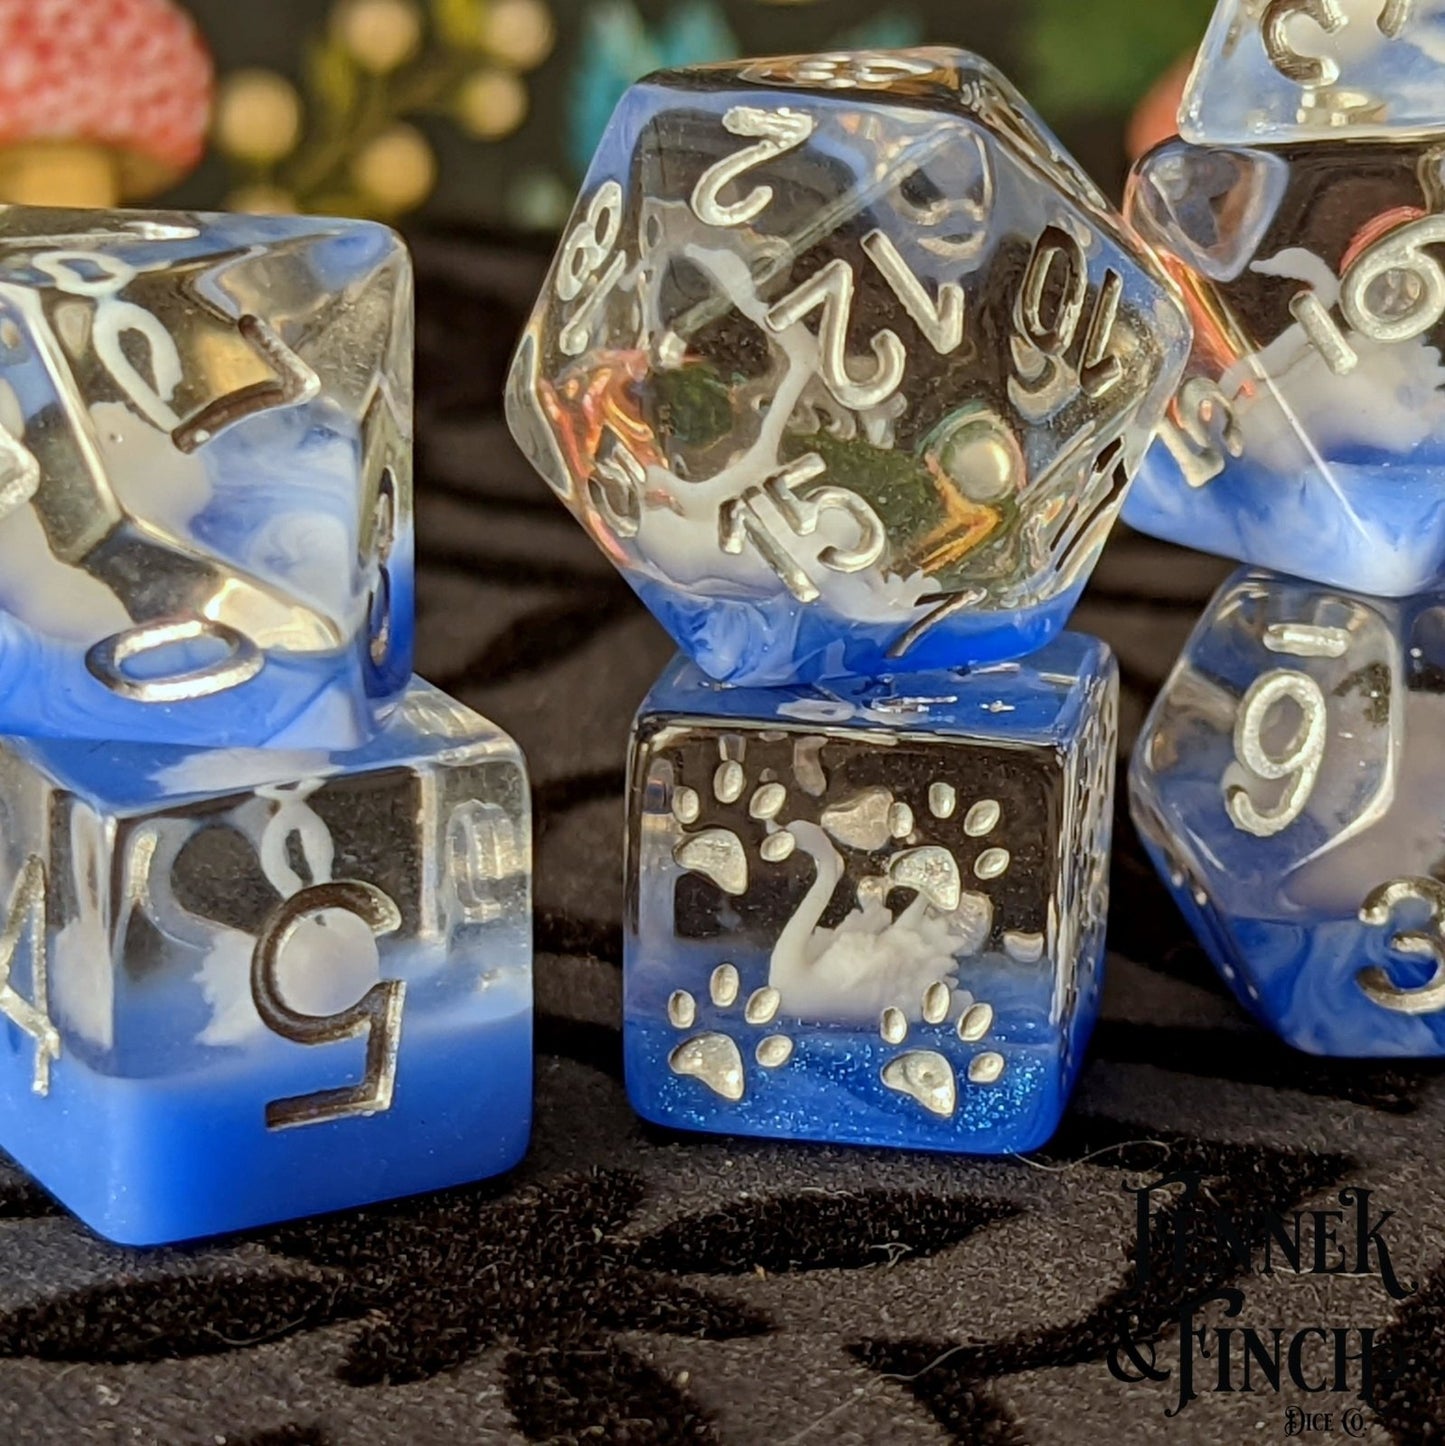 White Swan - 8 Dice Set - The Fourth Place